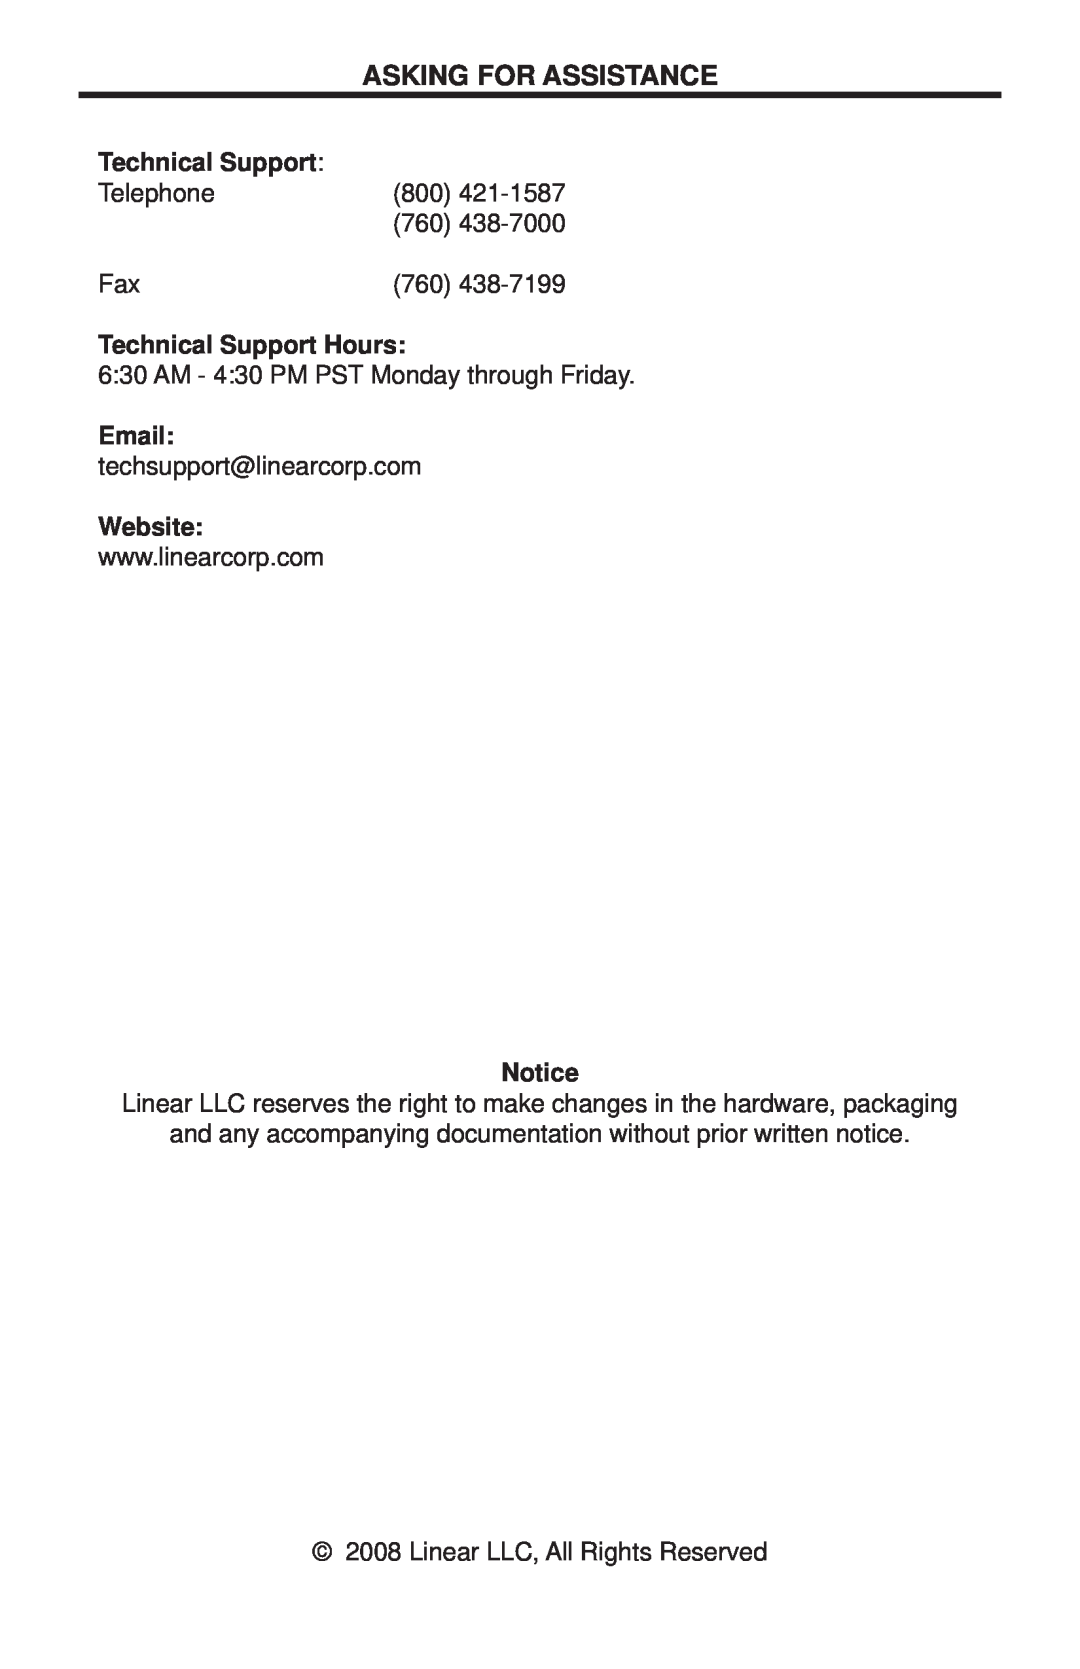 Linear COMP-DA-1X8 user manual Asking For Assistance, Technical Support Hours, Website 